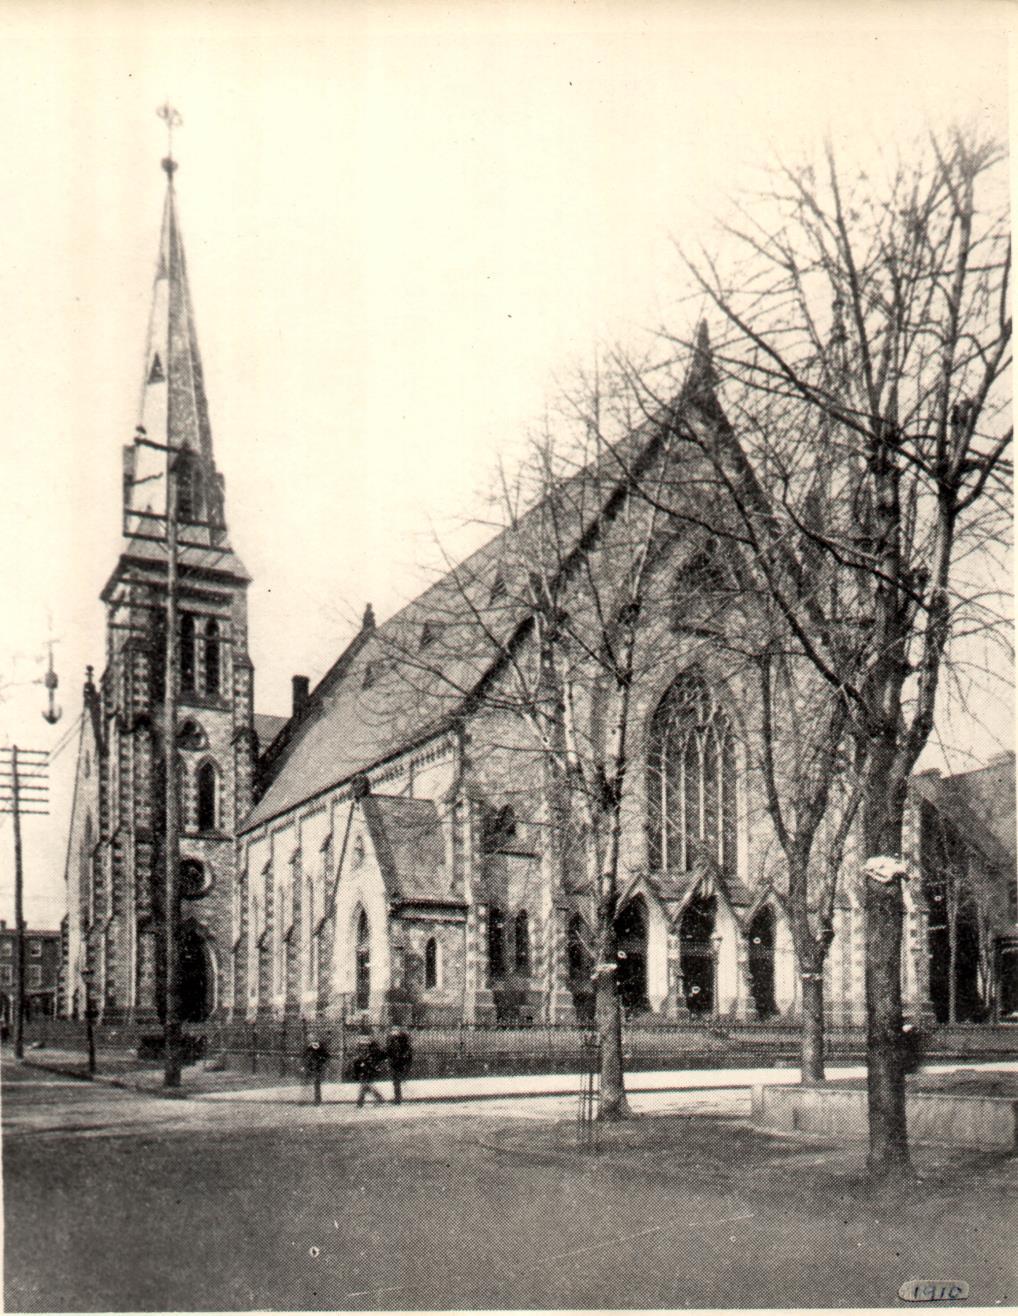 Grace Church from Ninth Street in 1910 Soot from the use of coal for heat in the city stained the stonework